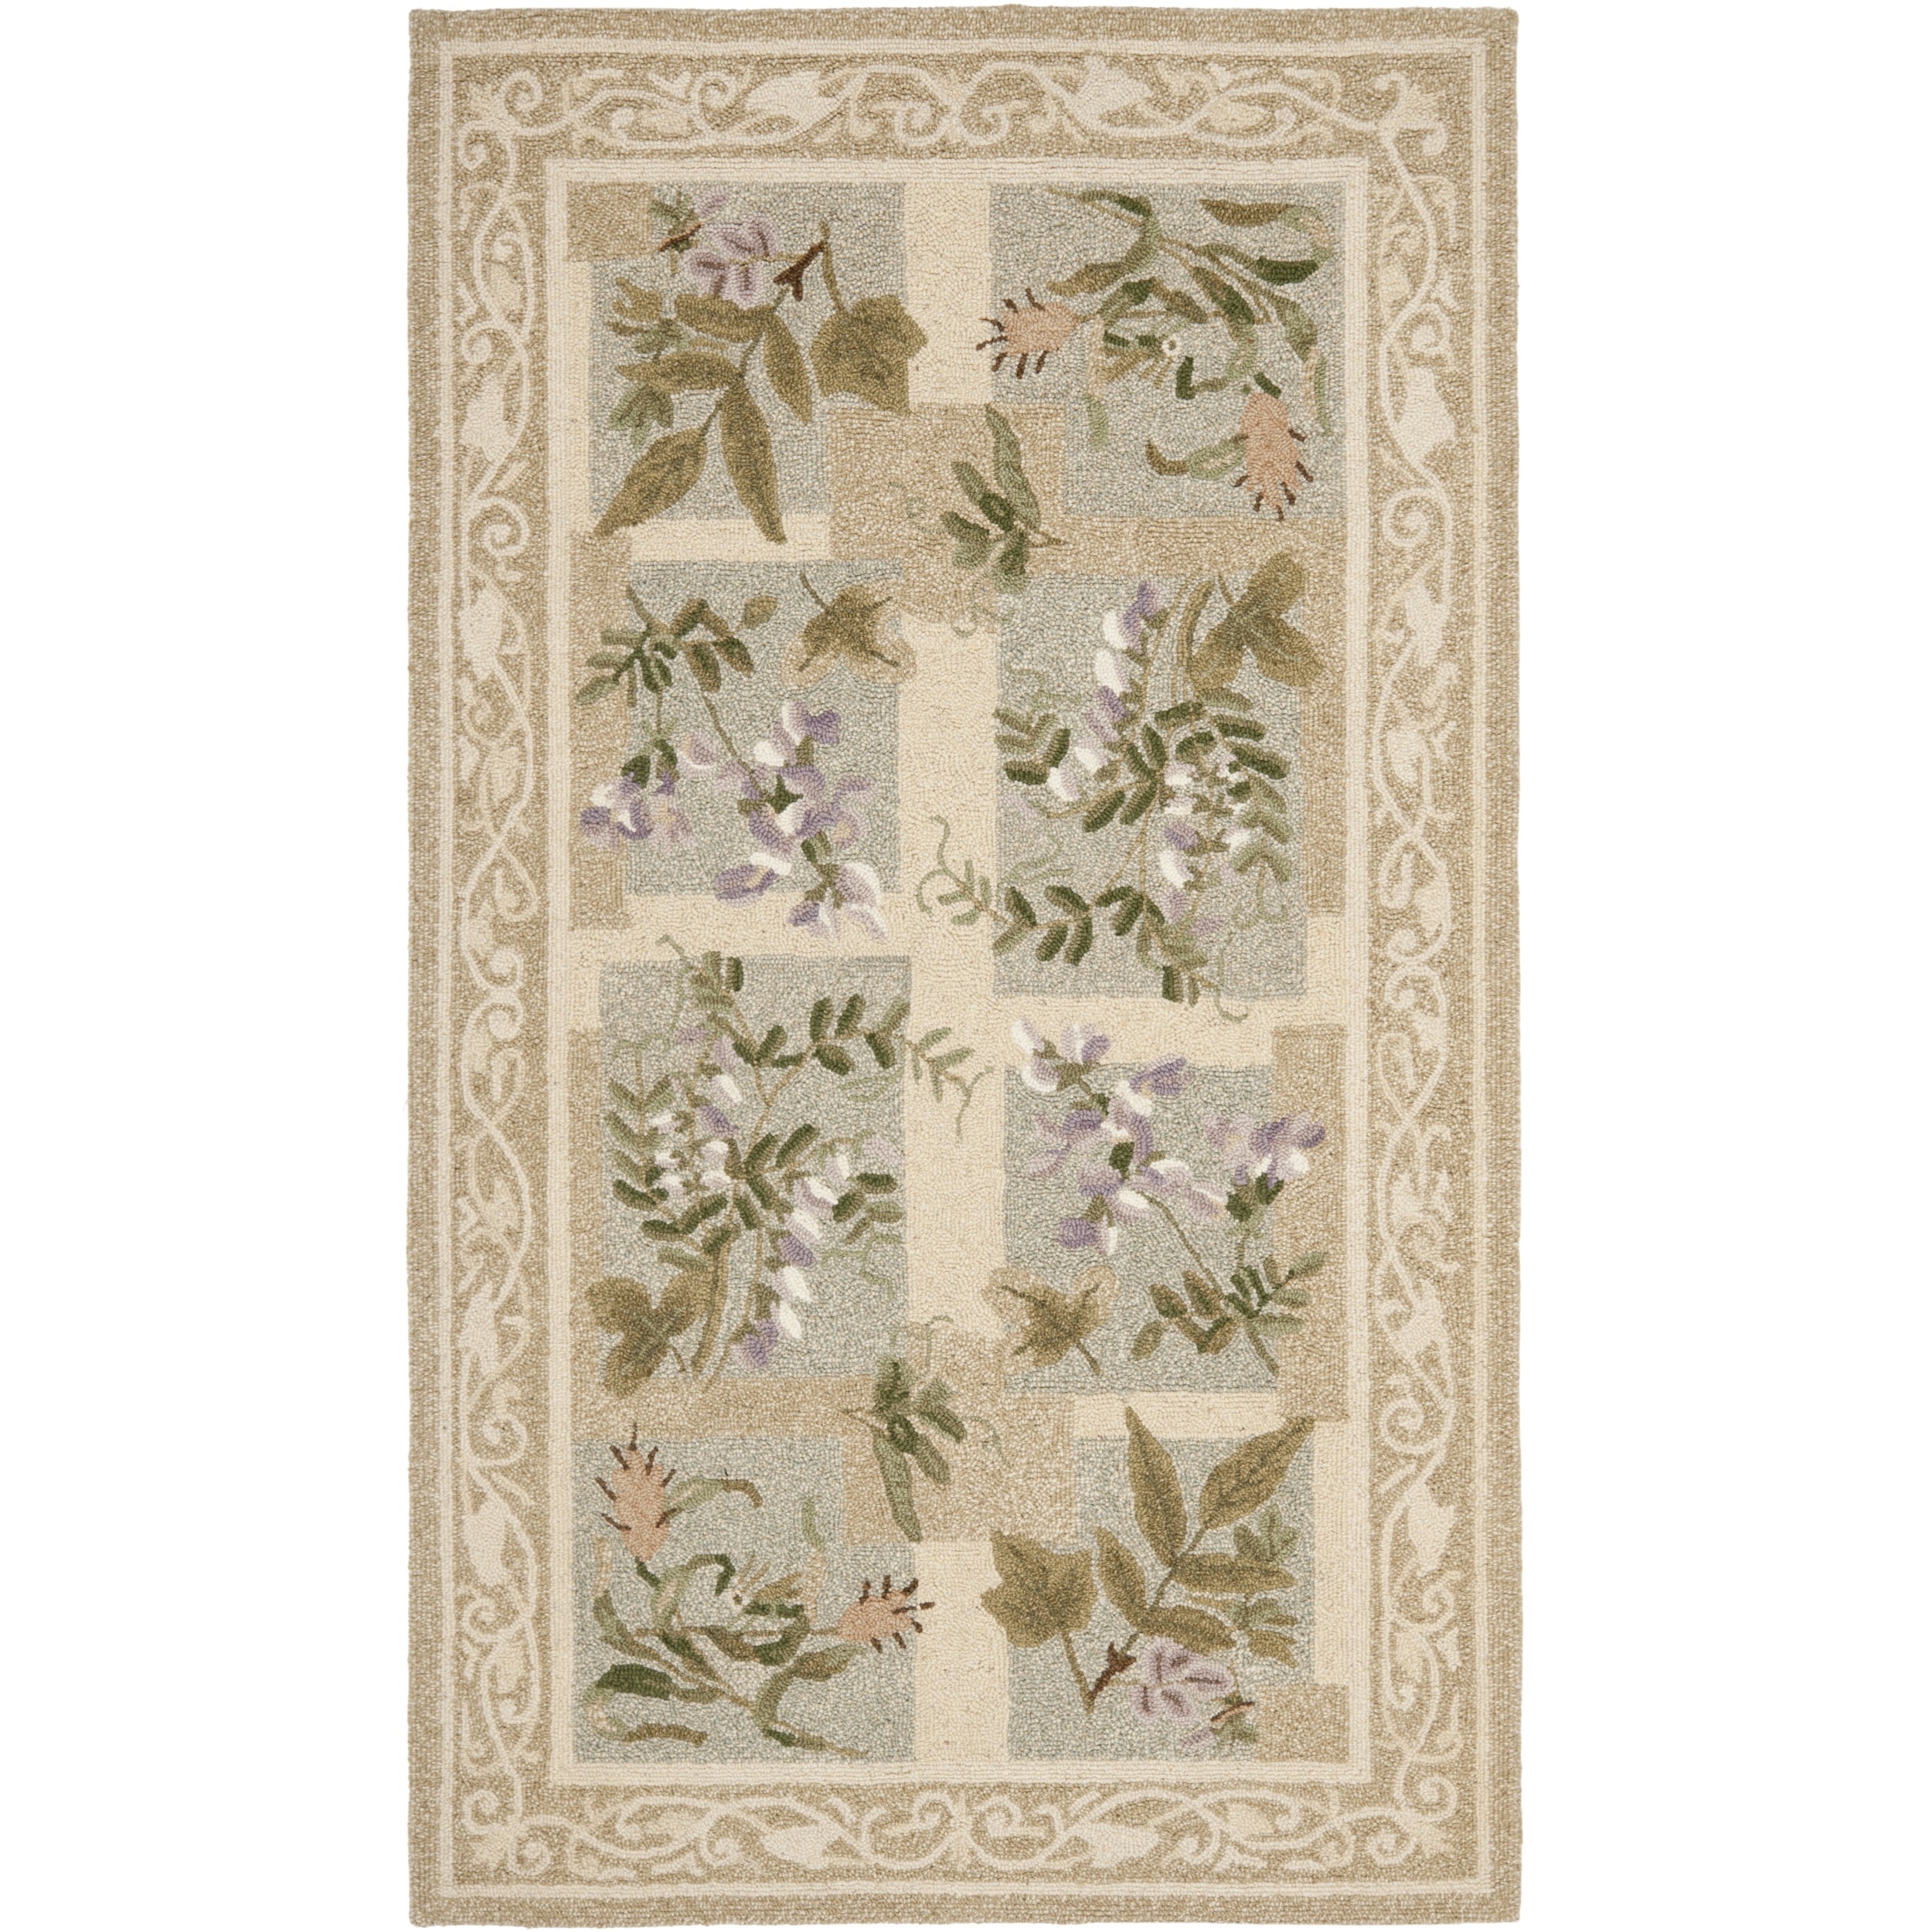 Hand hooked Floral Panels Light Green Wool Rug (26 X 8)